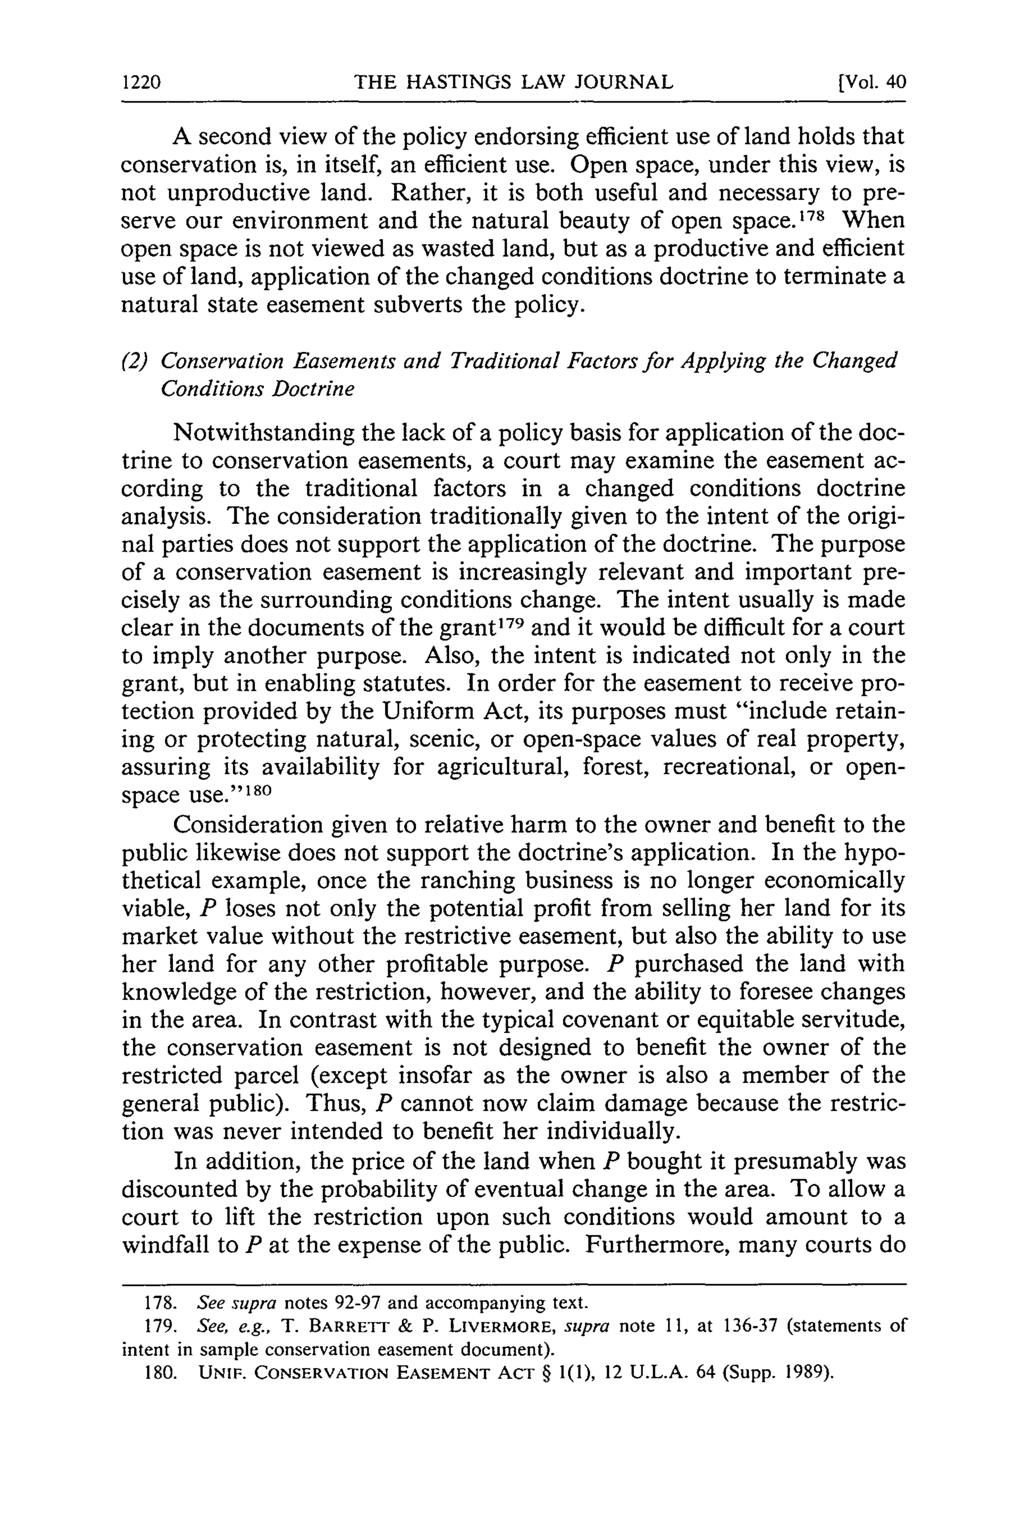 THE HASTINGS LAW JOURNAL [Vol. 40 A second view of the policy endorsing efficient use of land holds that conservation is, in itself, an efficient use.